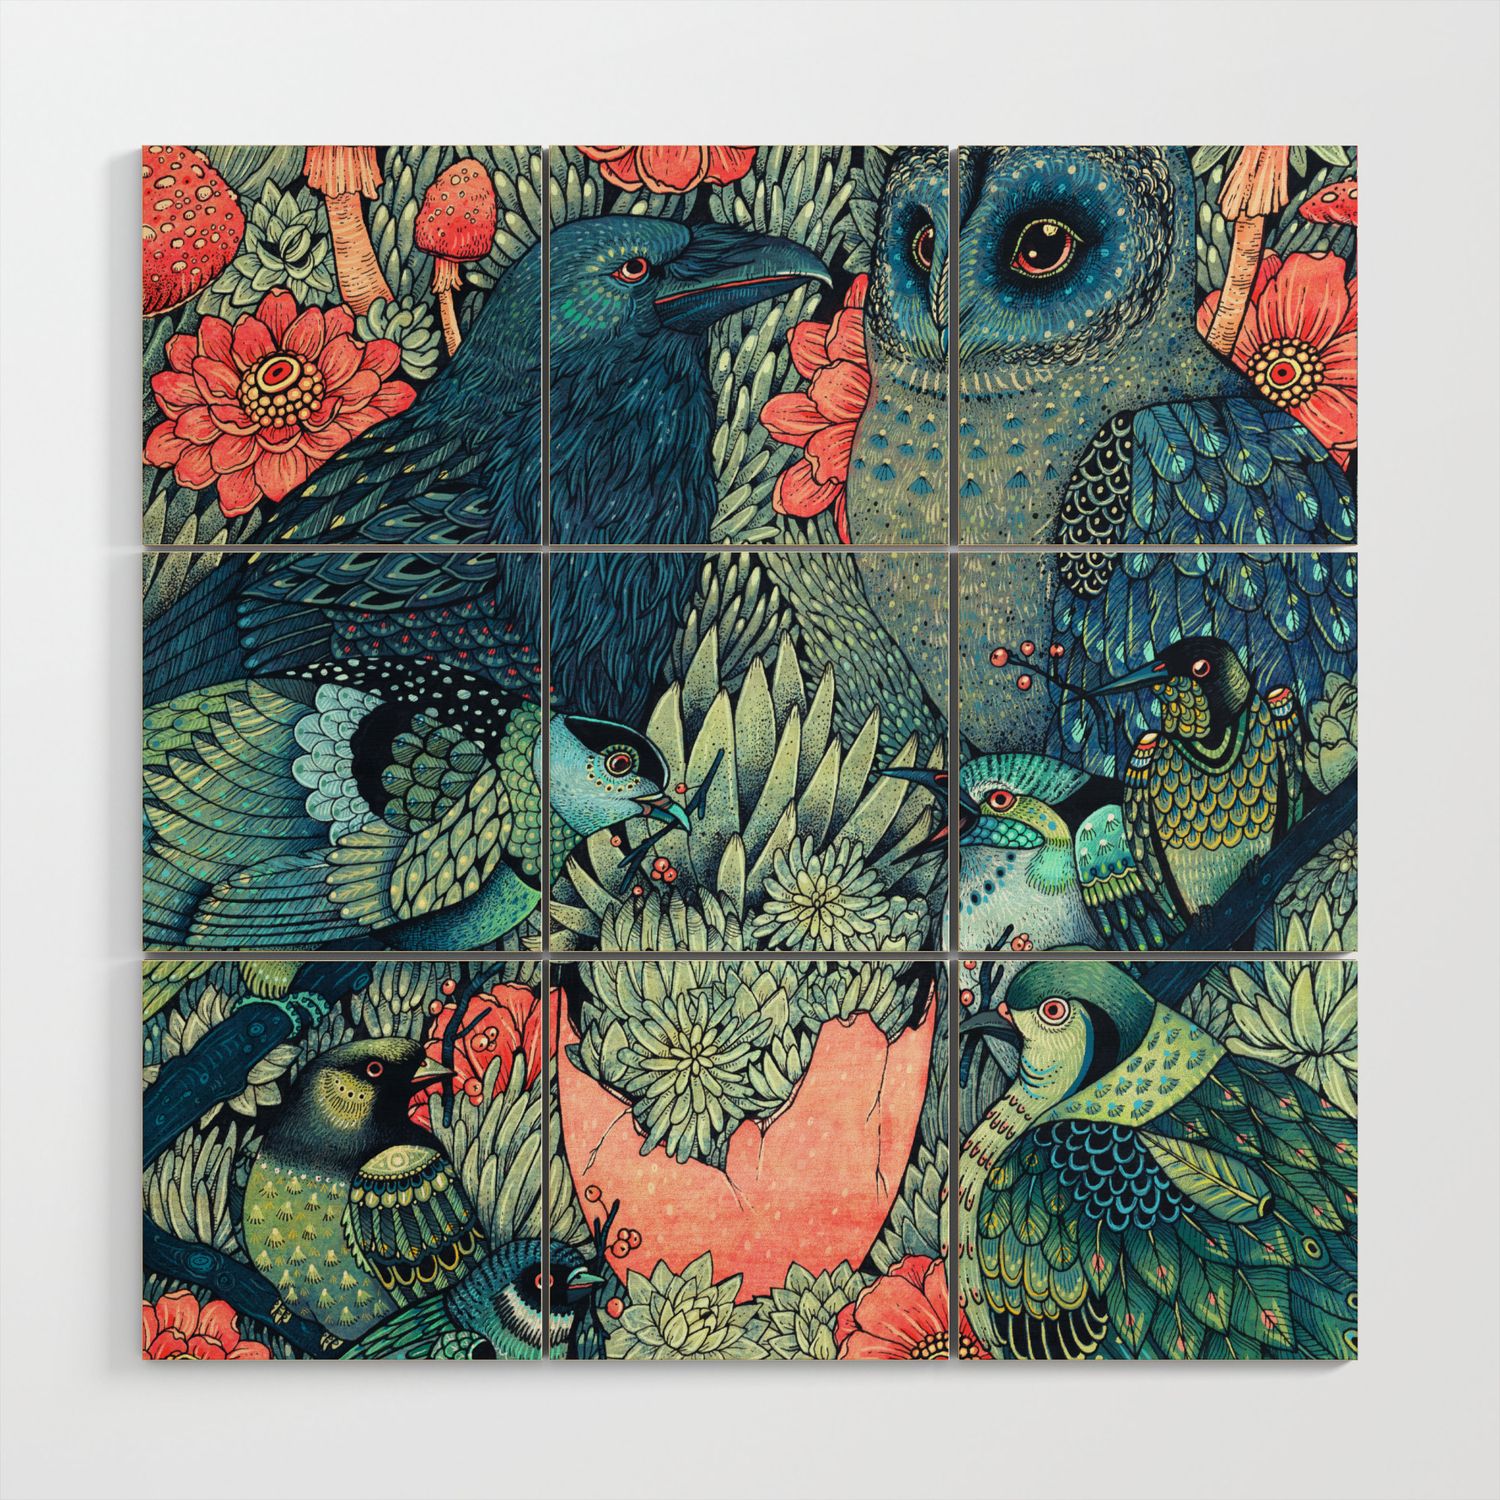 Cosmic Egg Wood Wall Artangela Rizza | Society6 Intended For Cosmic Egg Wall Art (View 5 of 15)